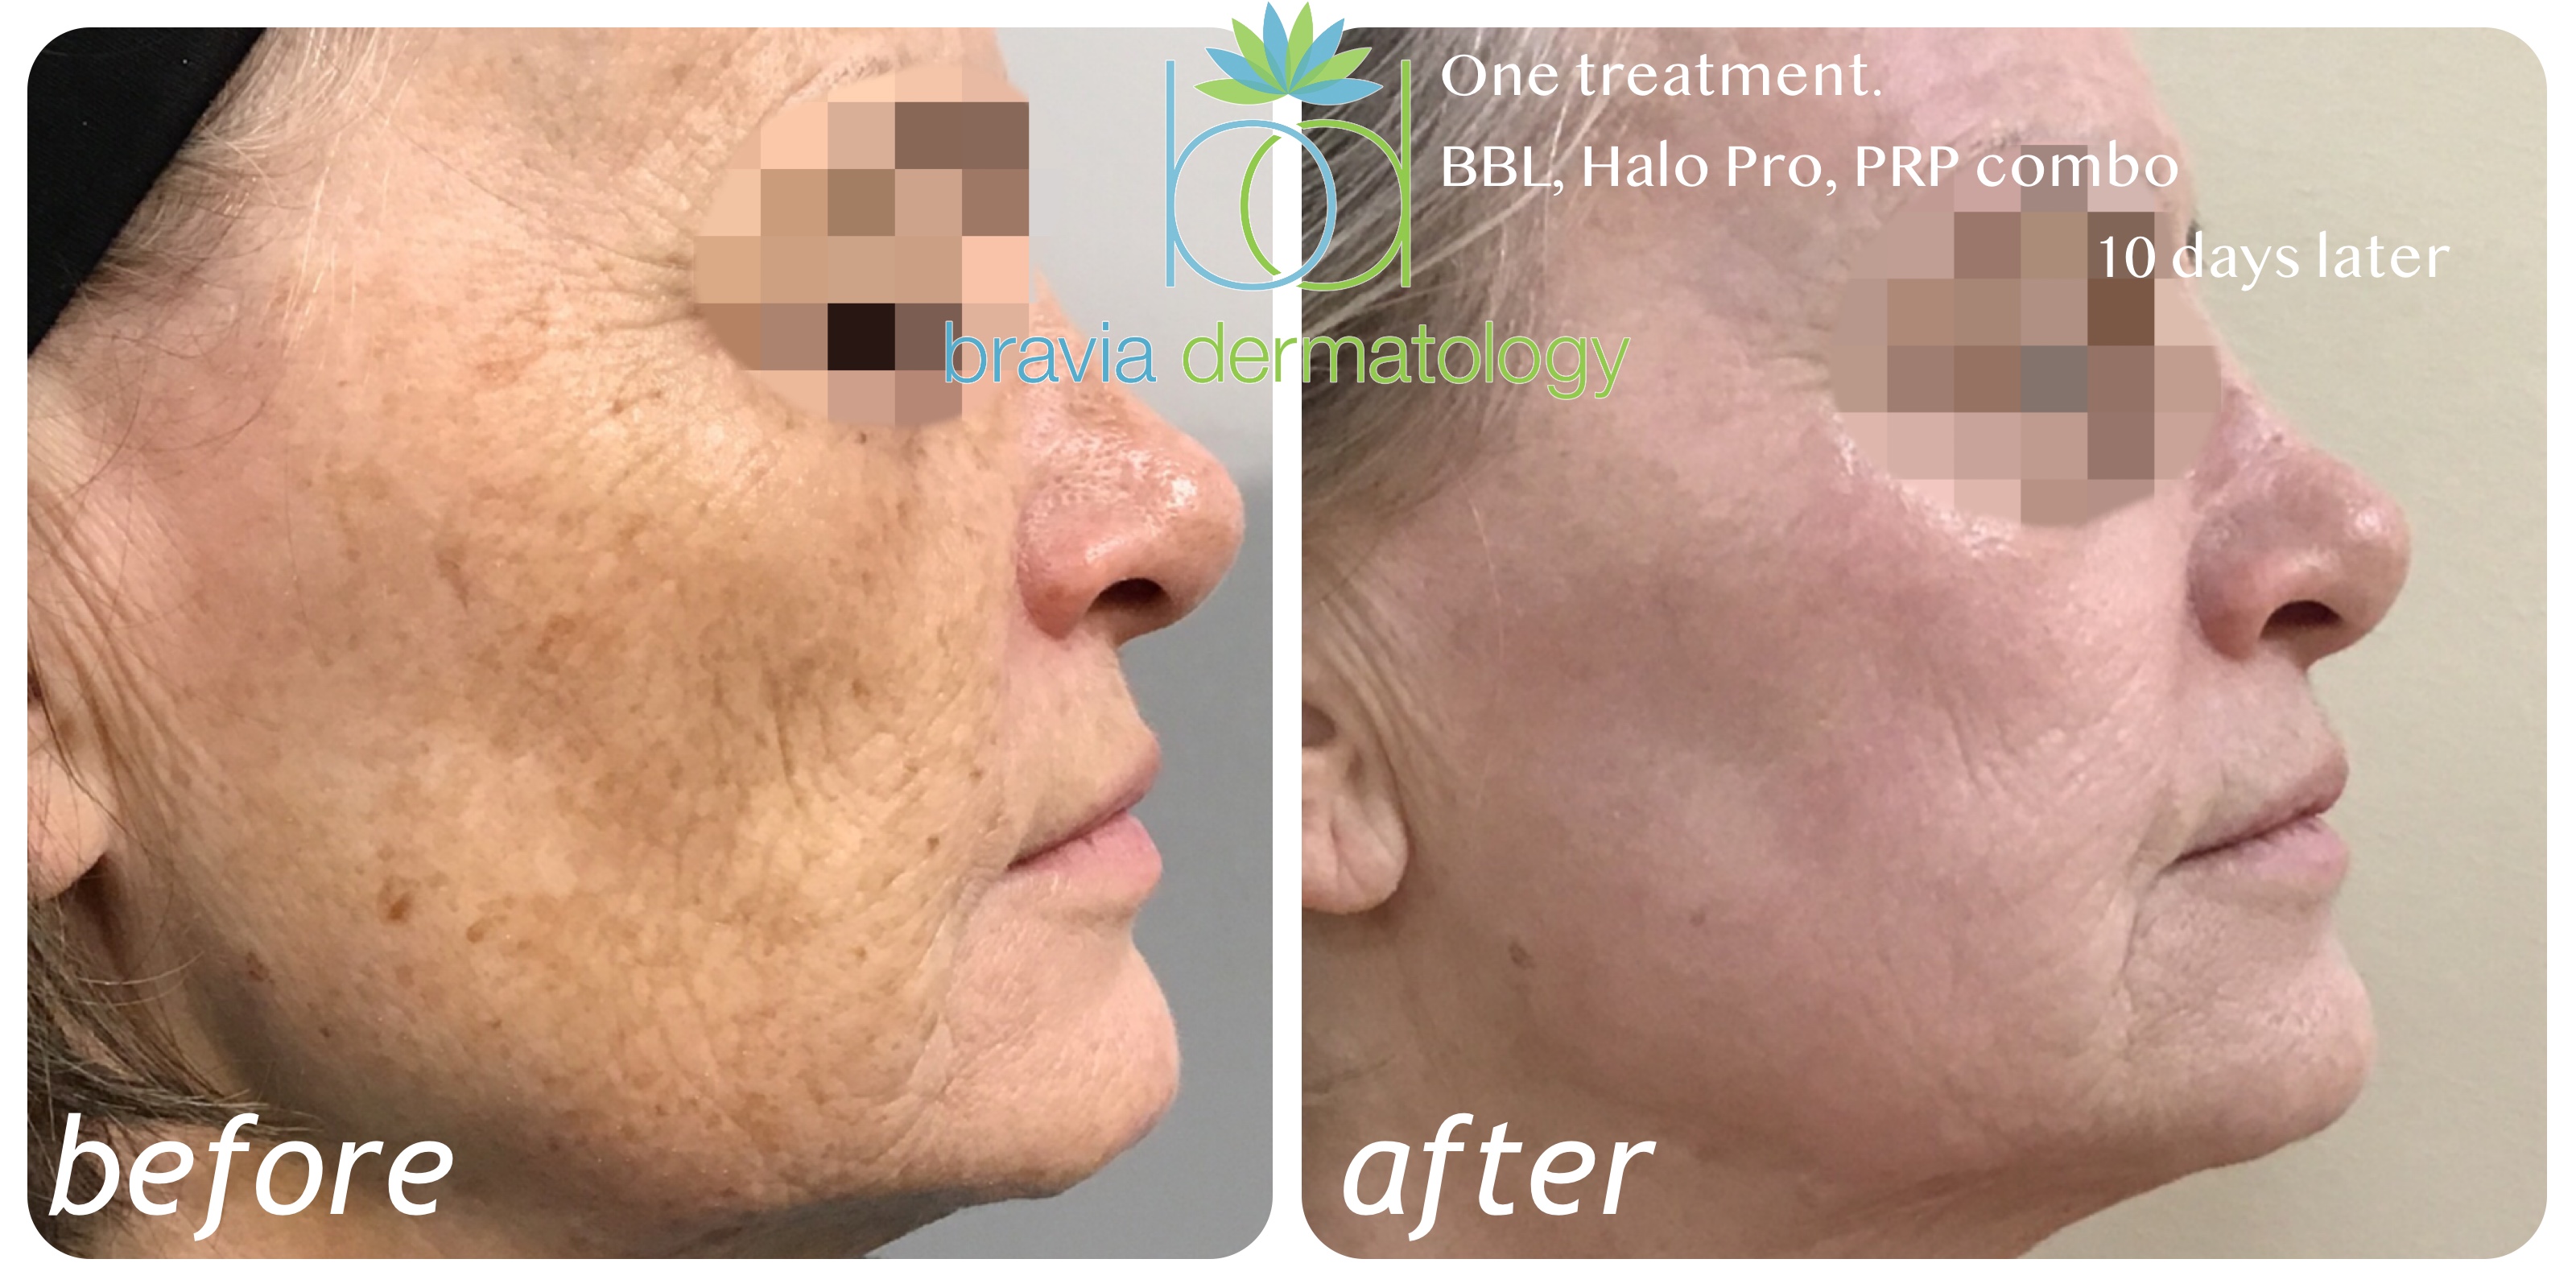 Combination treatment all done same day, BBL, Halo Pro, and Bravia Blood Boost. With combination treatments, the swelling can be more significant.